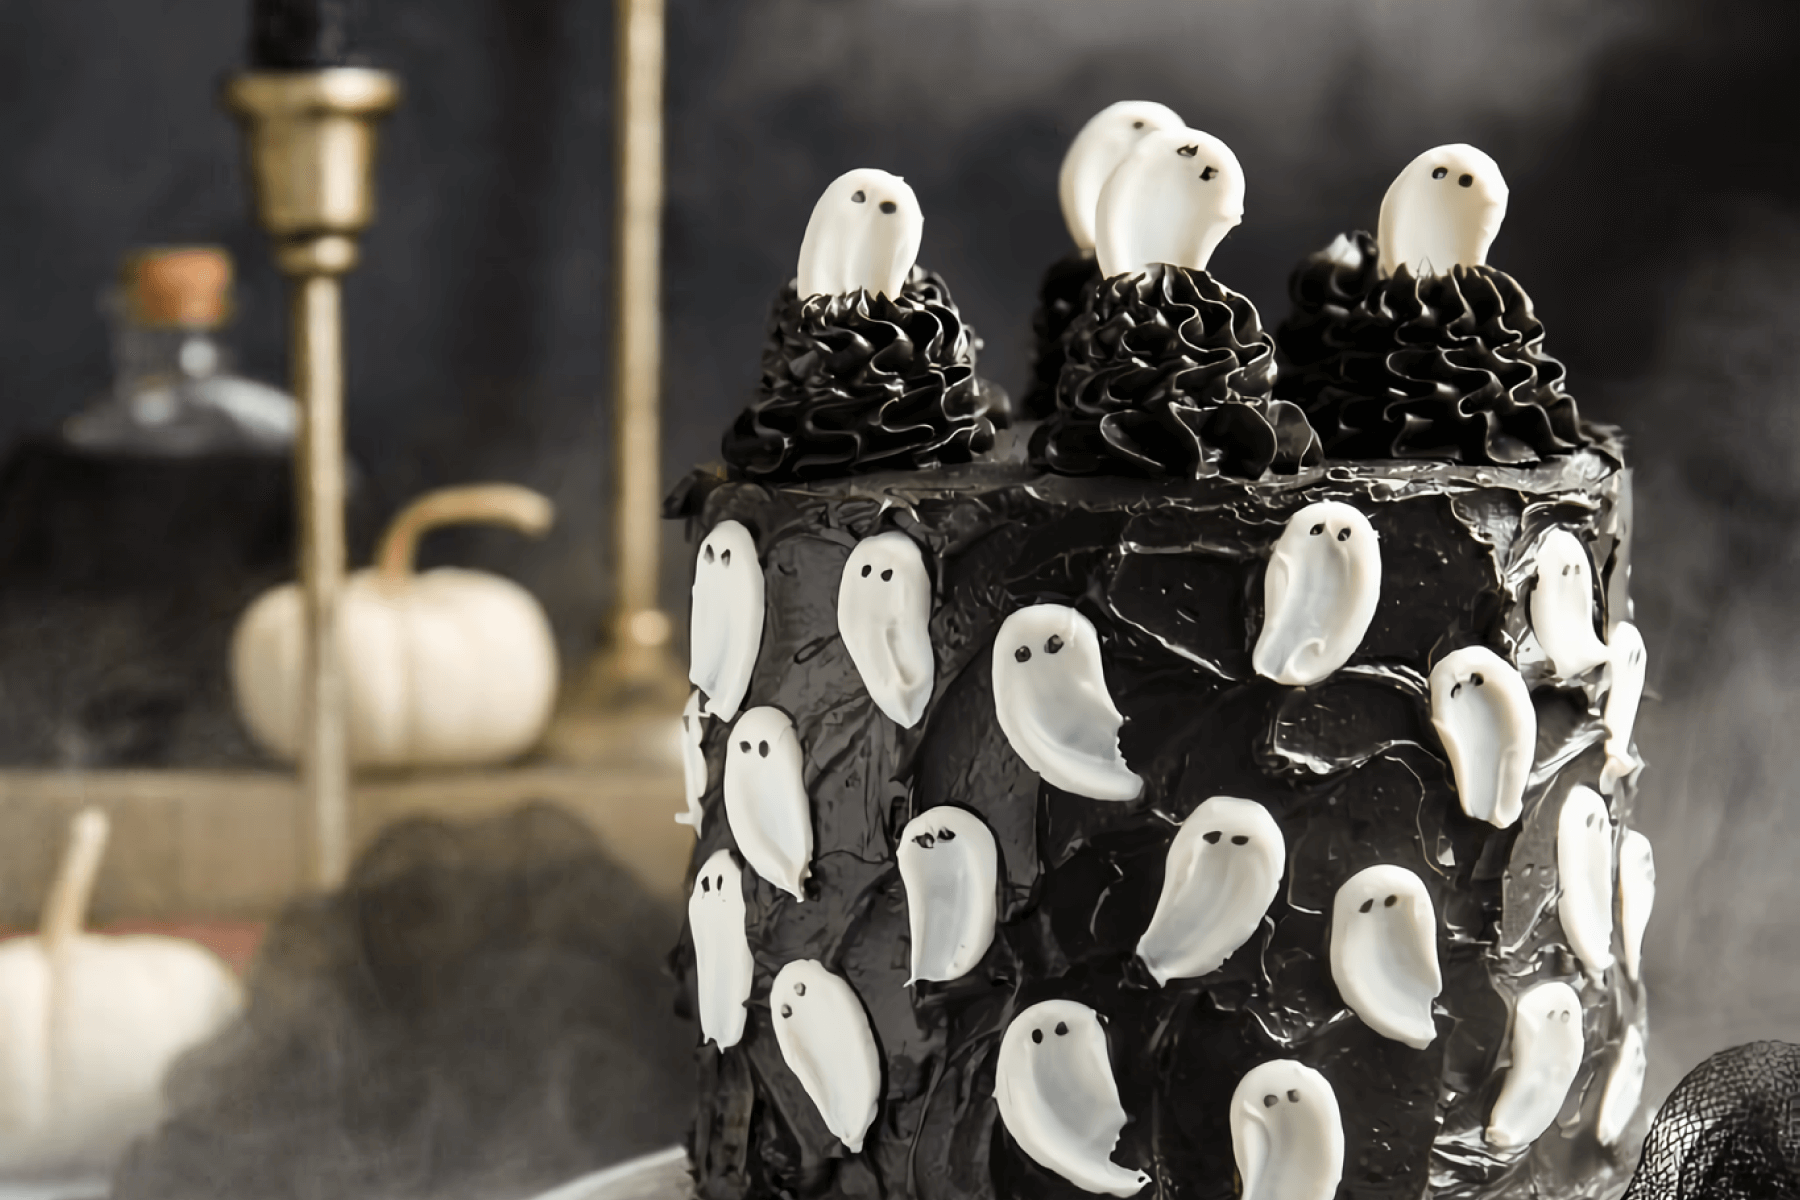 A black layer cake covered in simple white ghosts and ghosts emerging from the top, with white gourds and brass candle holders in the smoky distance.